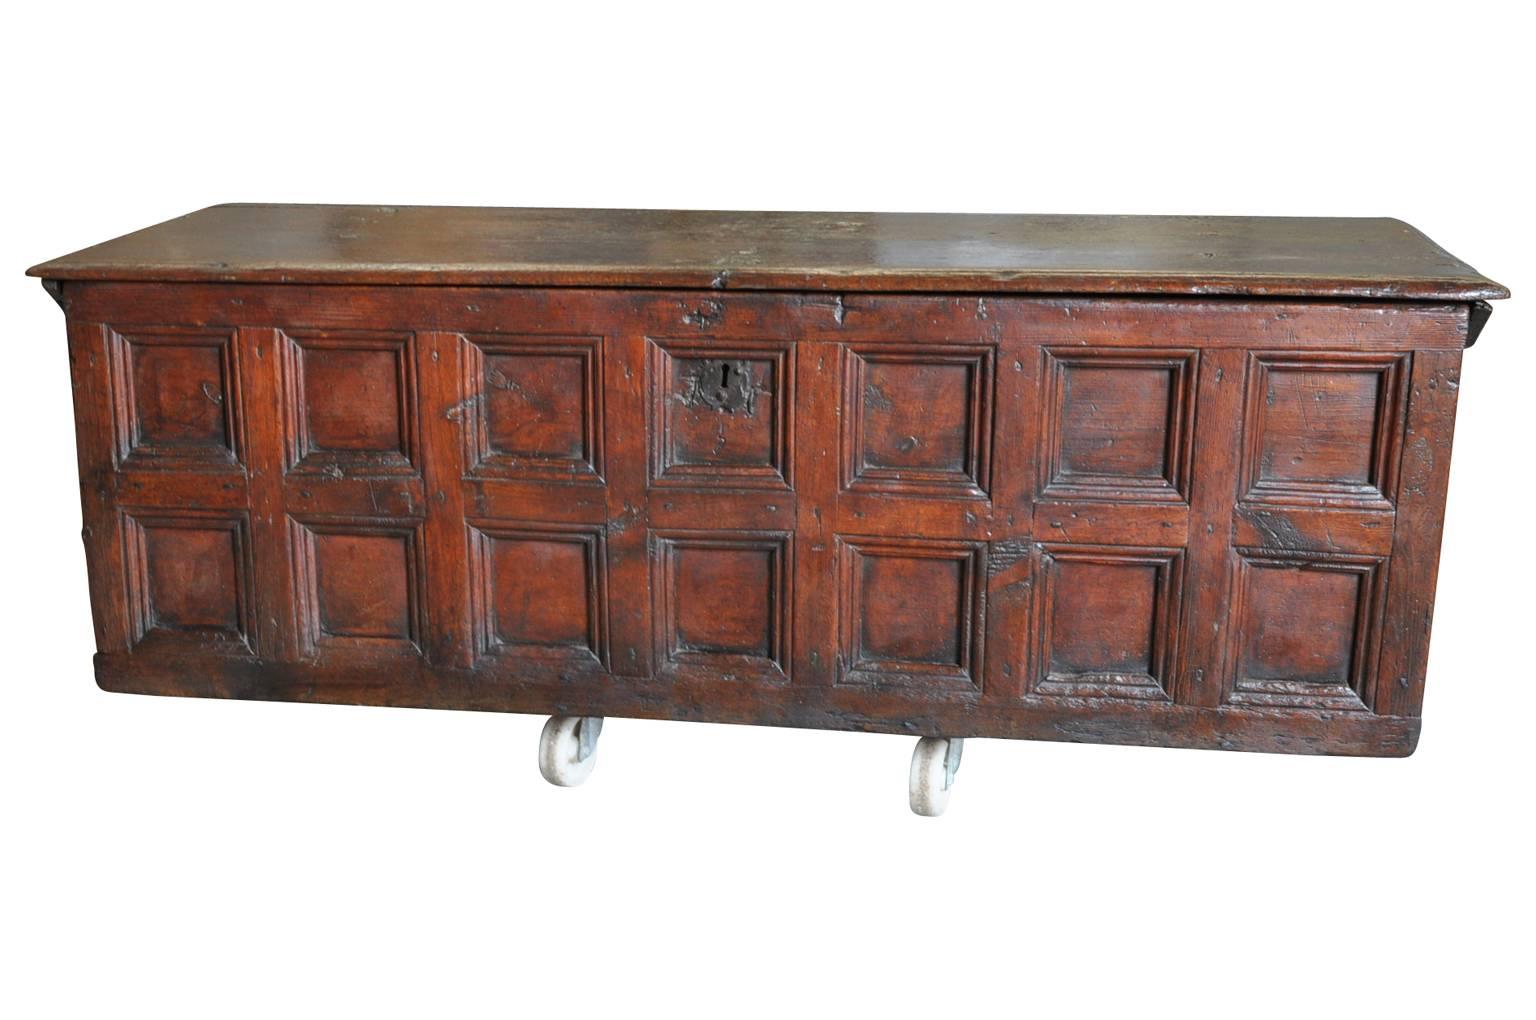 A very handsome 18th century trunk from France. Wonderfully constructed in richly stain pine wood. Wonderful at the base of a bed, under a picture window or as a coffee table.